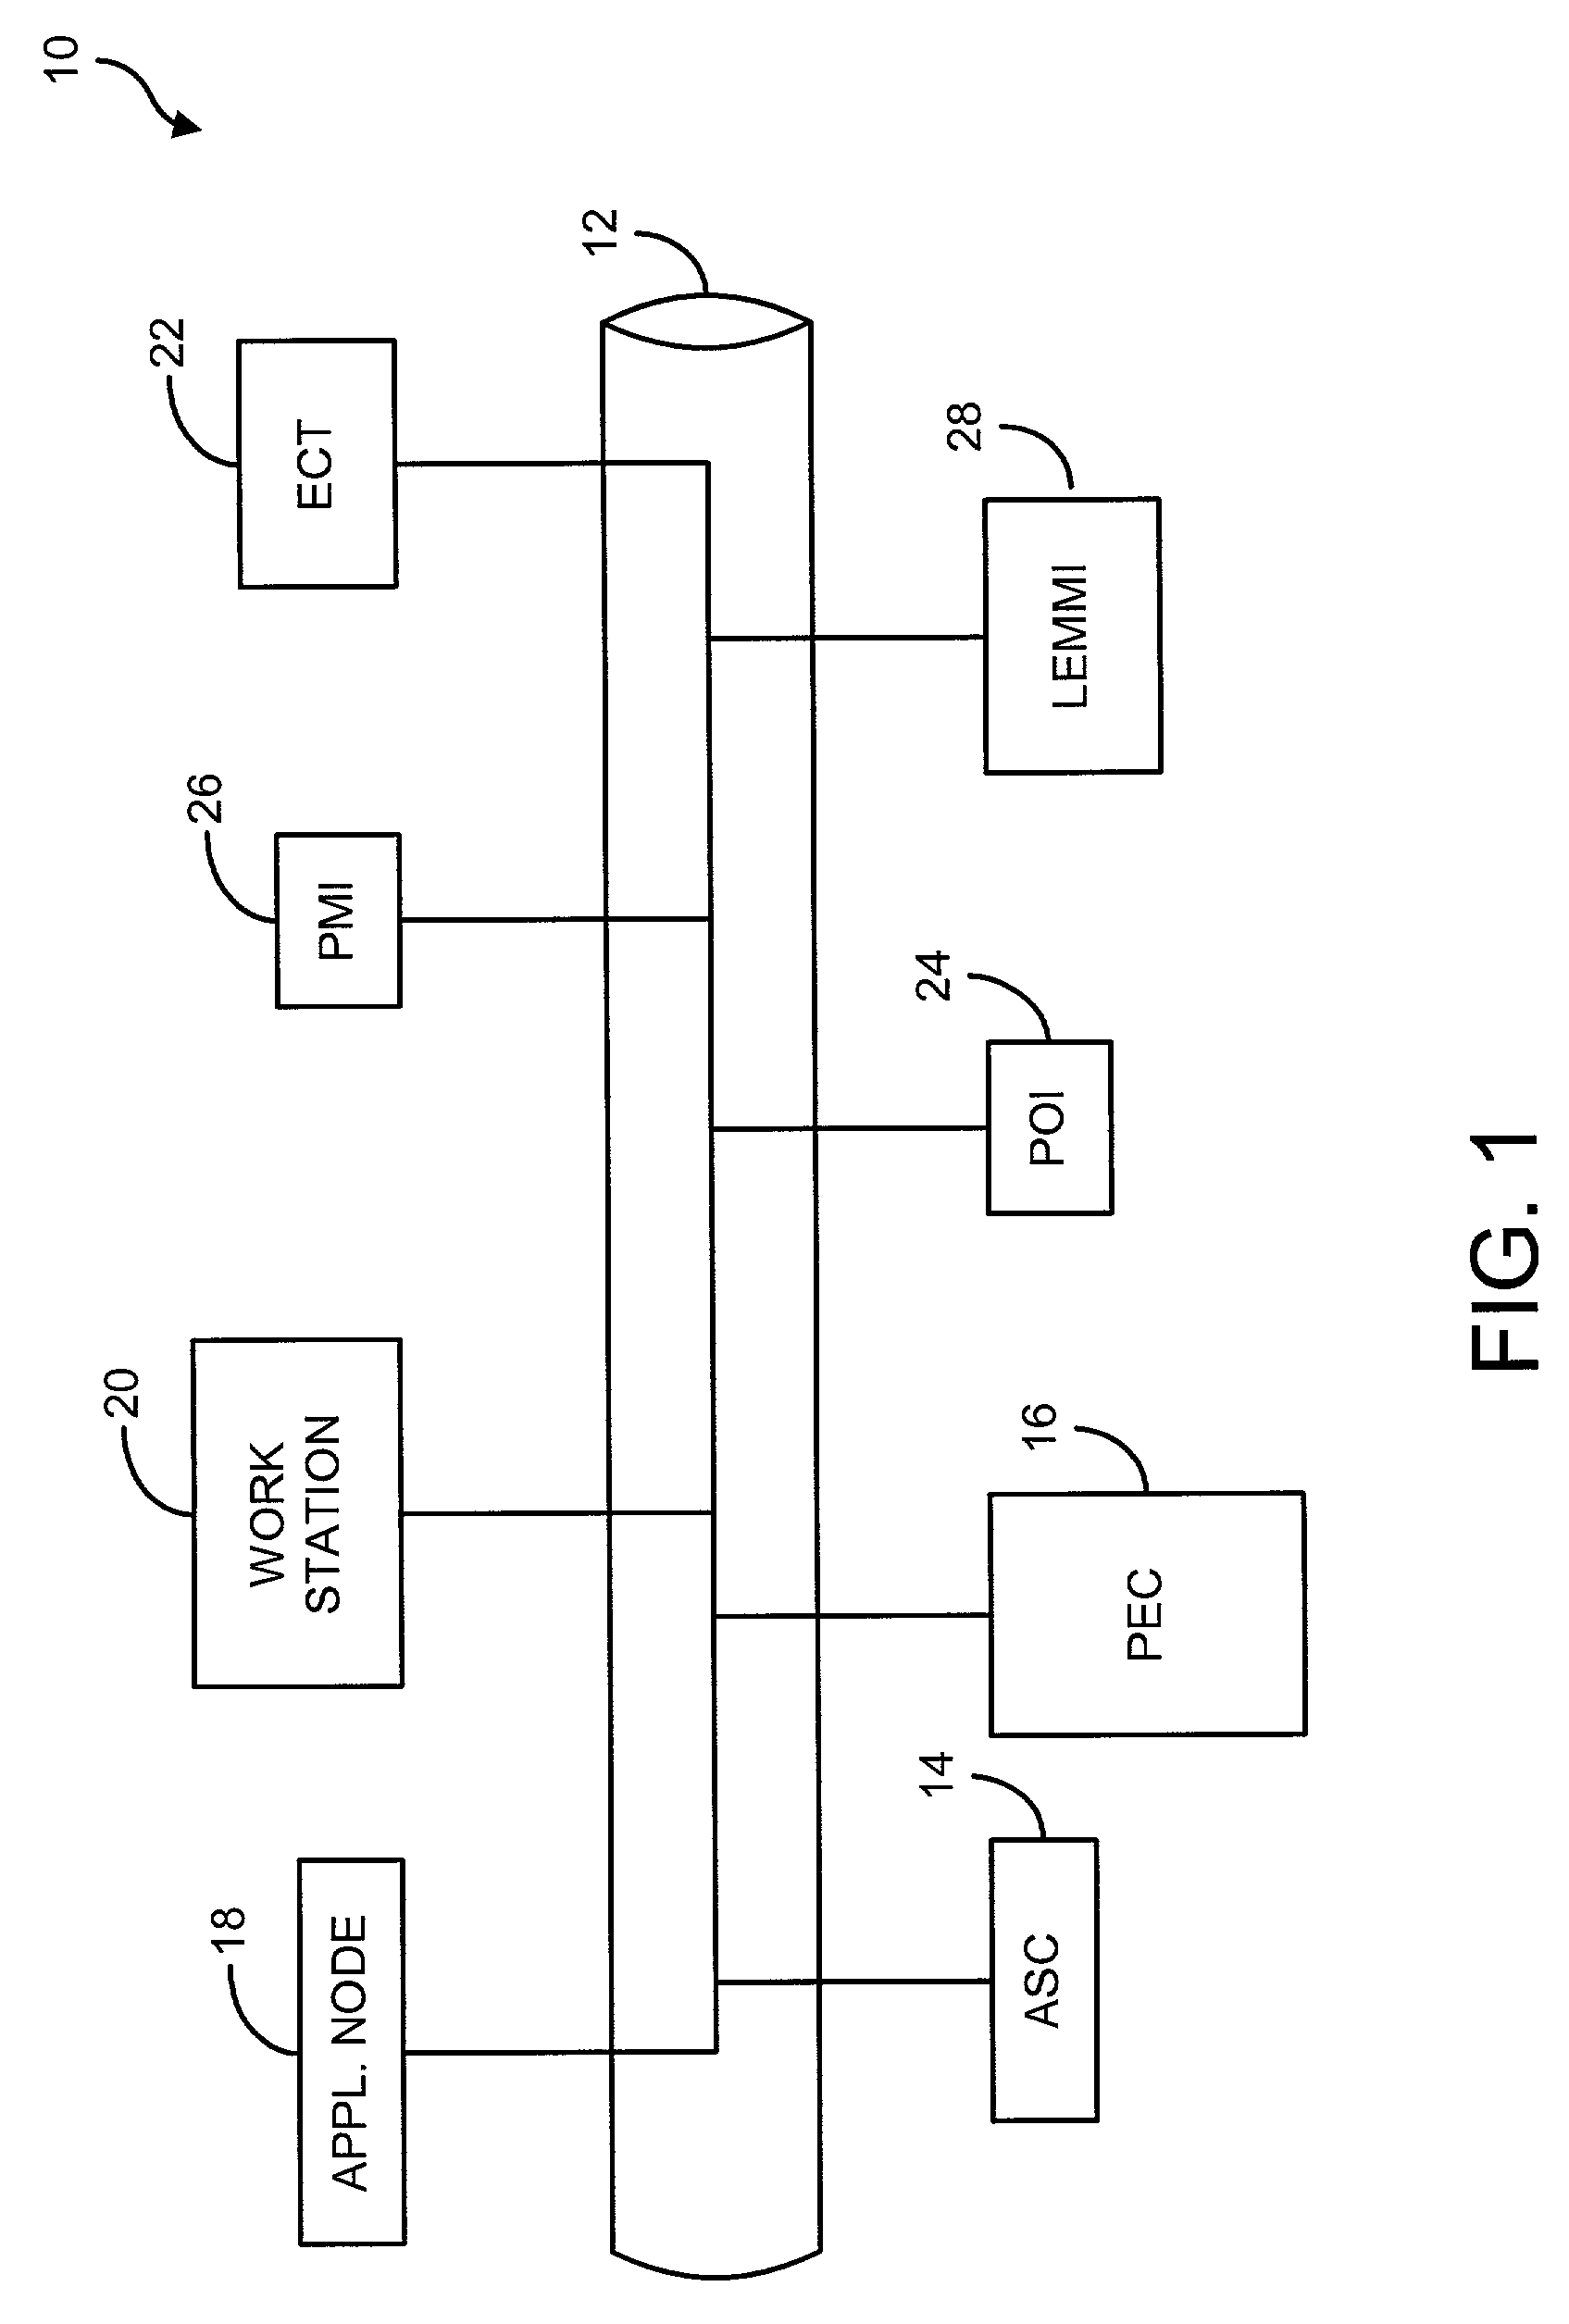 System and method for servicing messages between device controller nodes and via a lon network